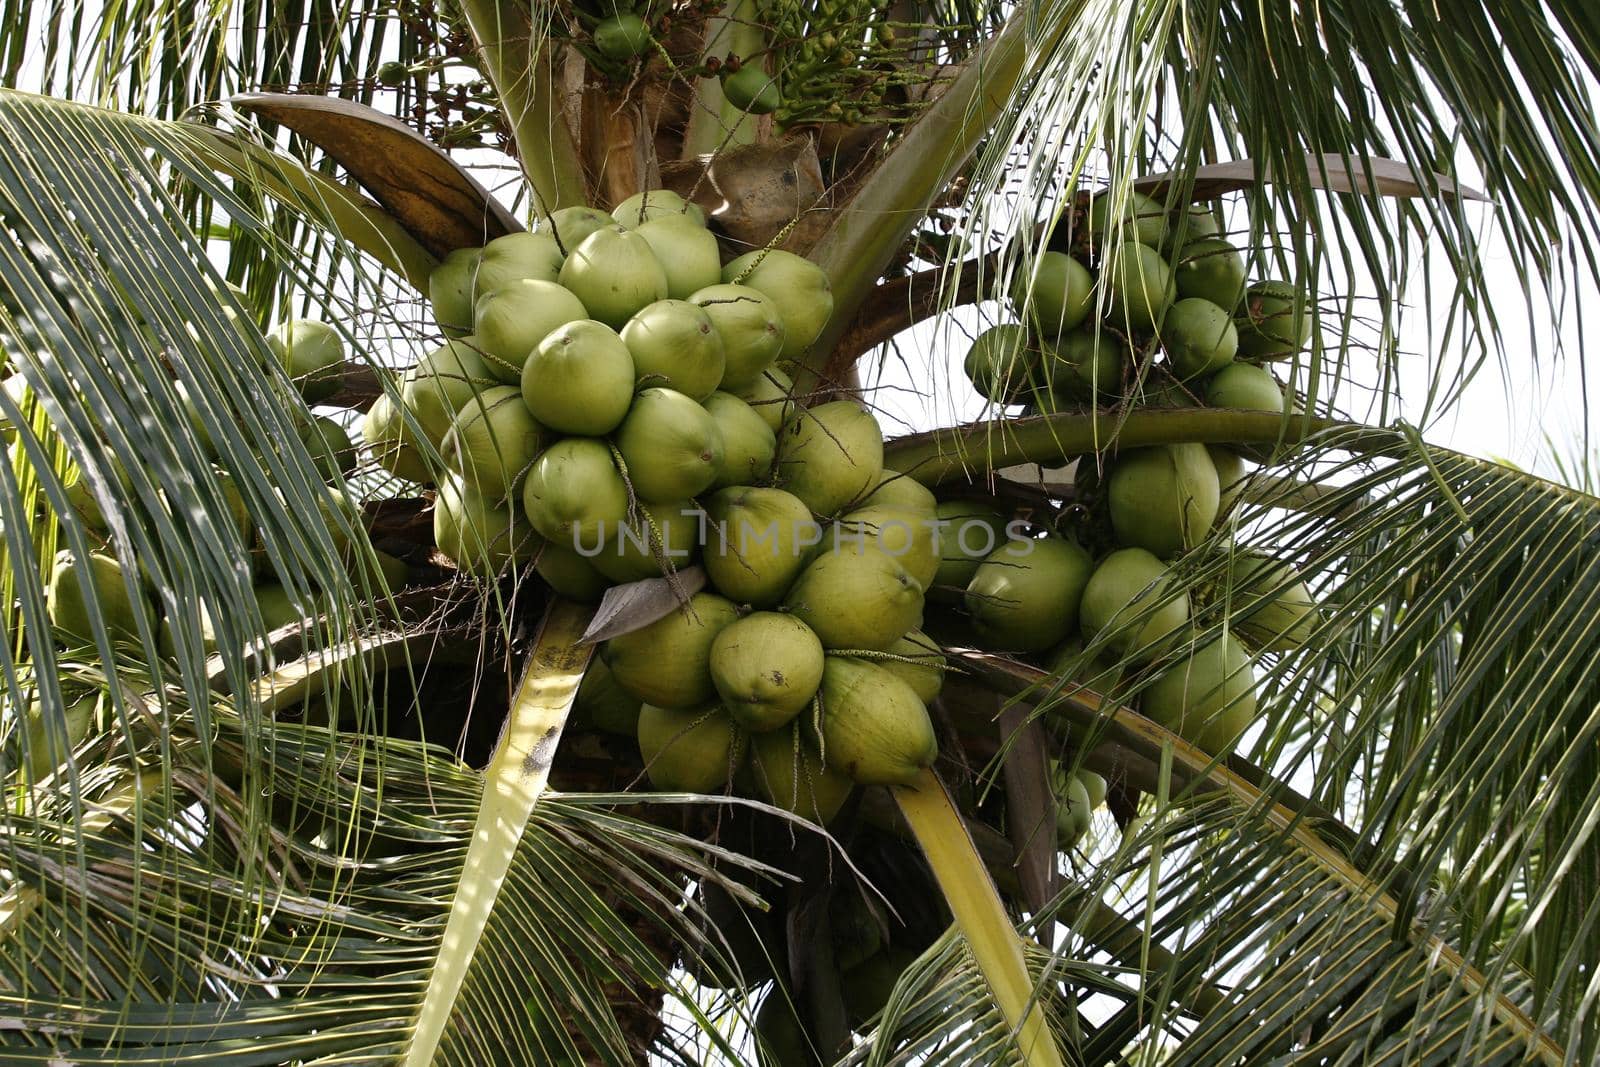 conde, bahia / brazil - july 17, 2013: Coconut plantation on farm in the city of Conde. The fruit is used to extract water and vegetable oil.